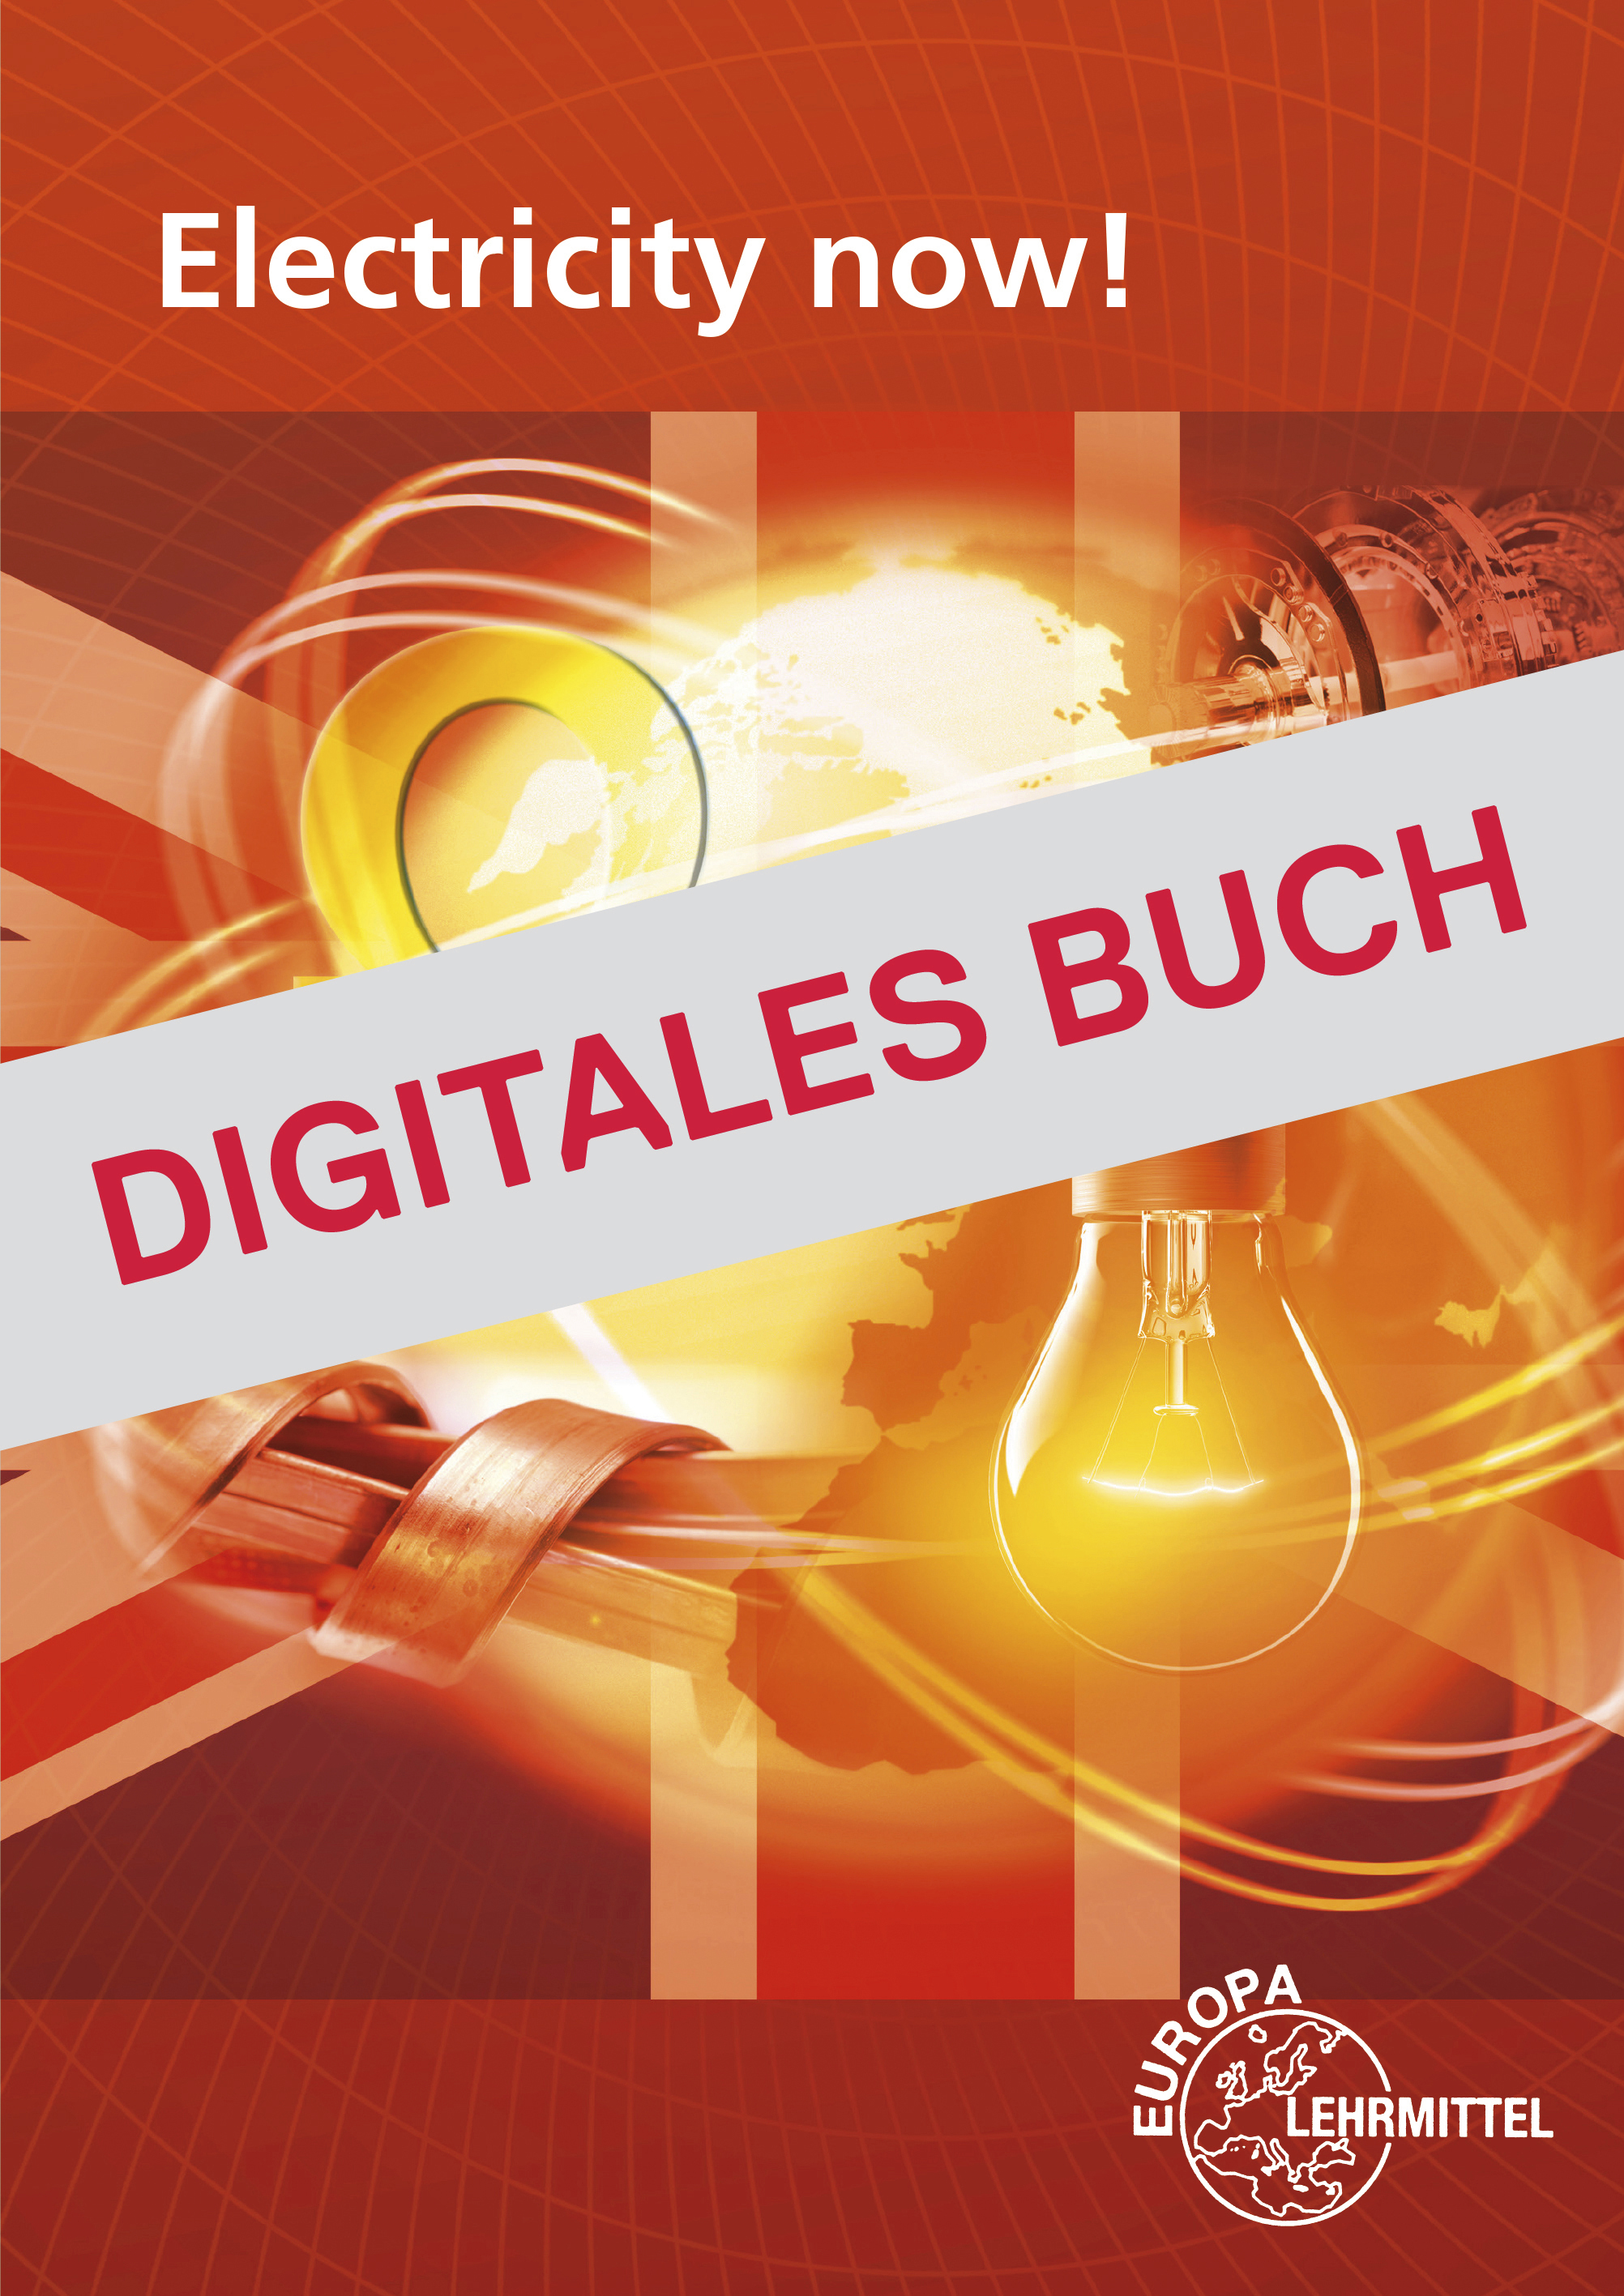 Electricity now! - Digitales Buch